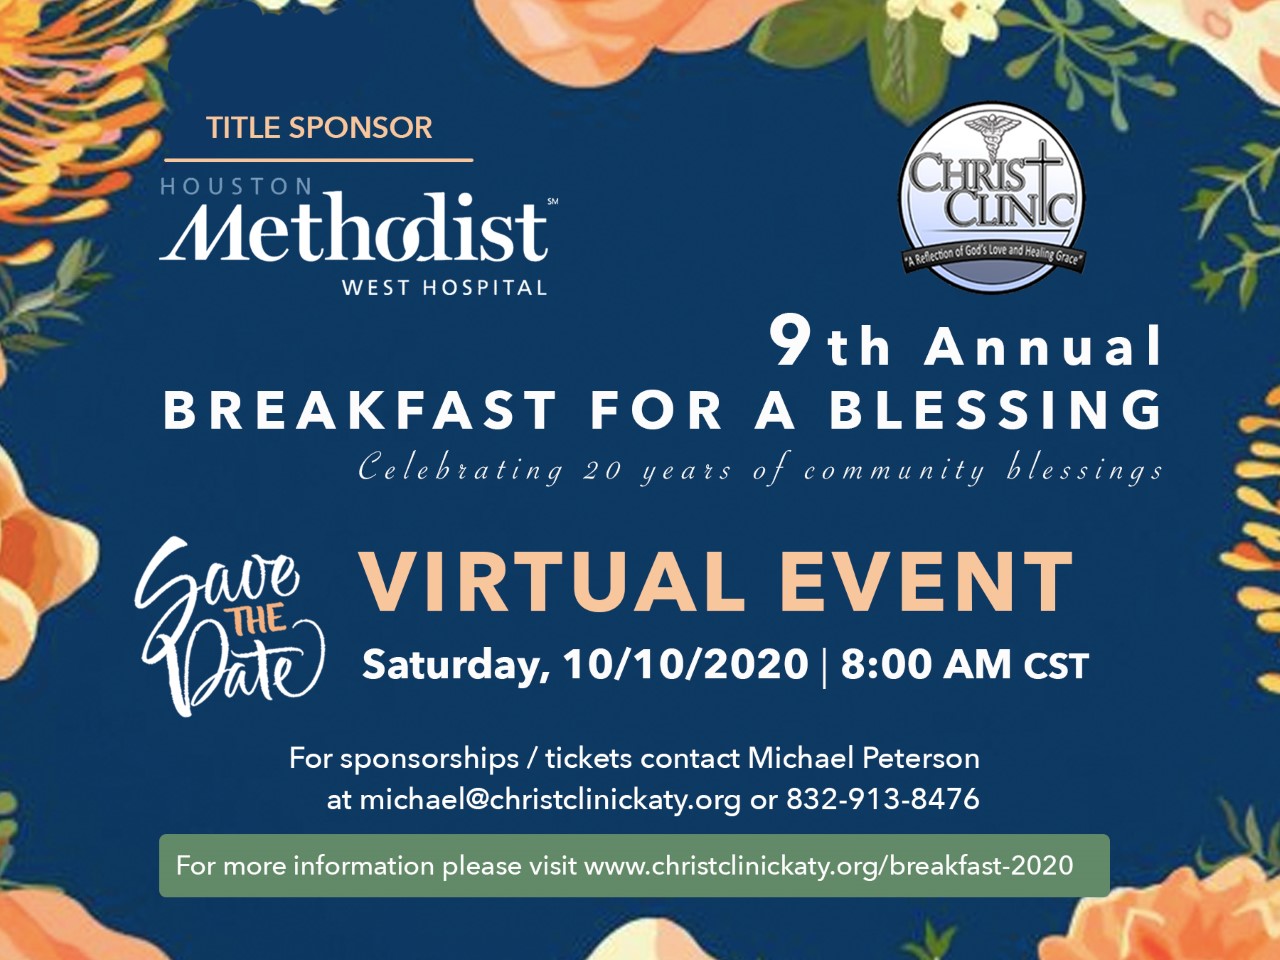 Christ Clinic’s premiere fundraiser Breakfast for a Blessing goes virtual celebrating 20 years of community blessings Photo